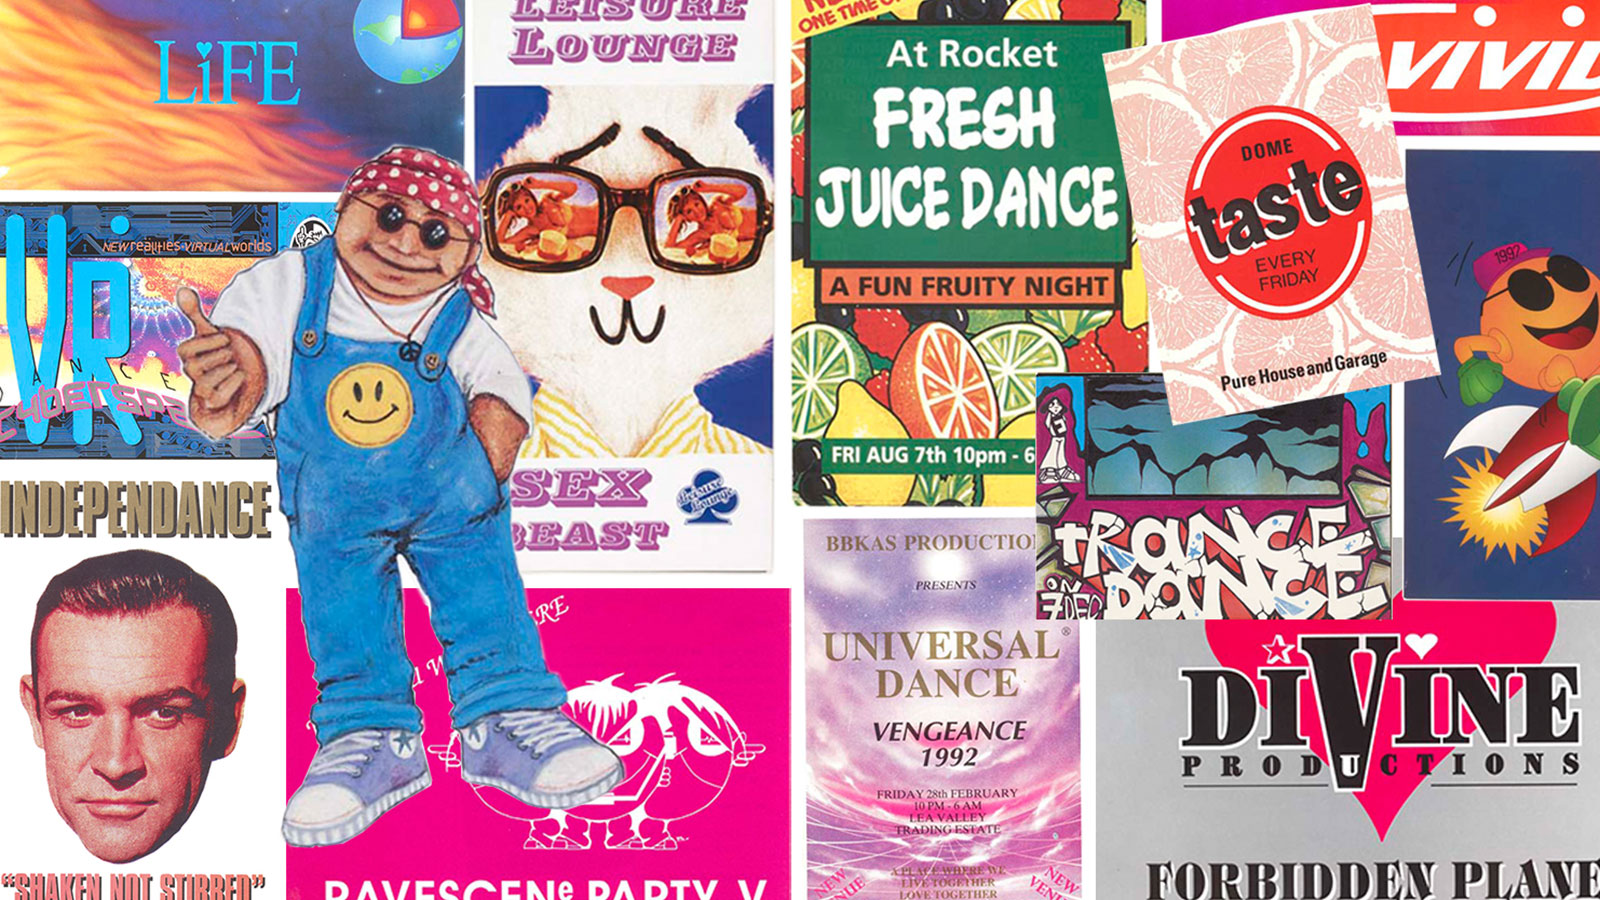 Photographic collage of flyers promoting club nights